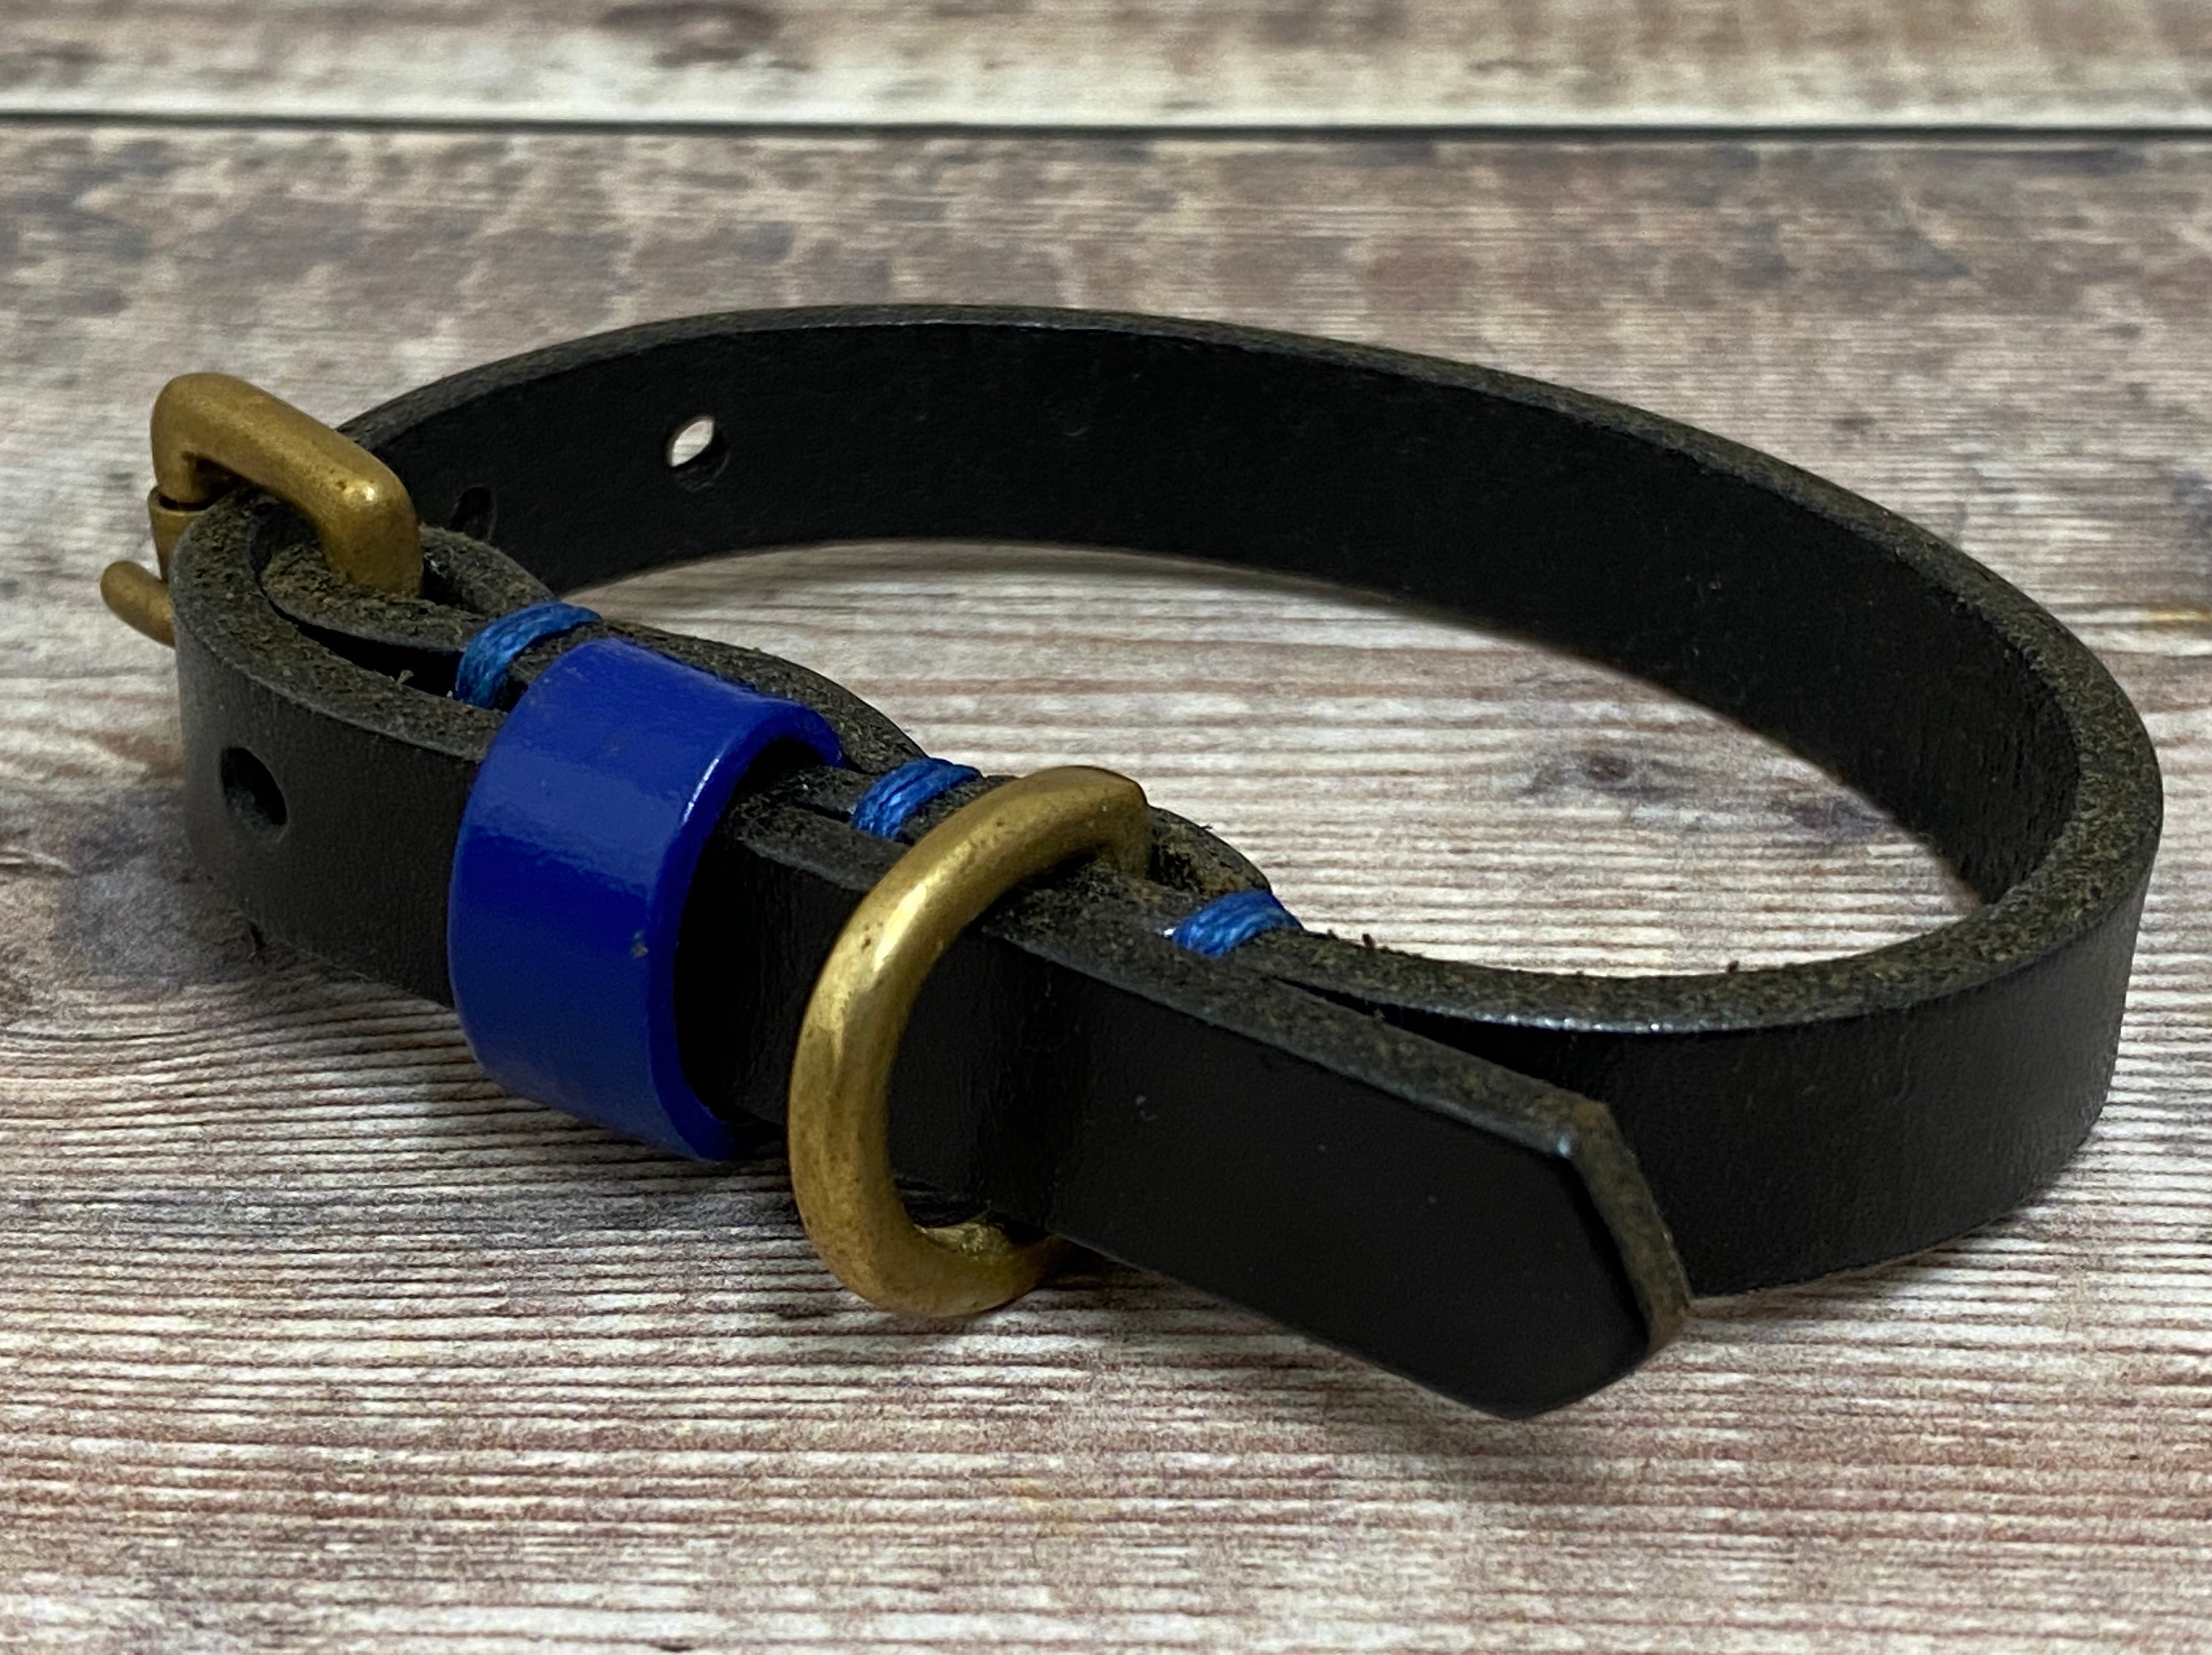 Black Leather Dog Collar with Royal Blue keep